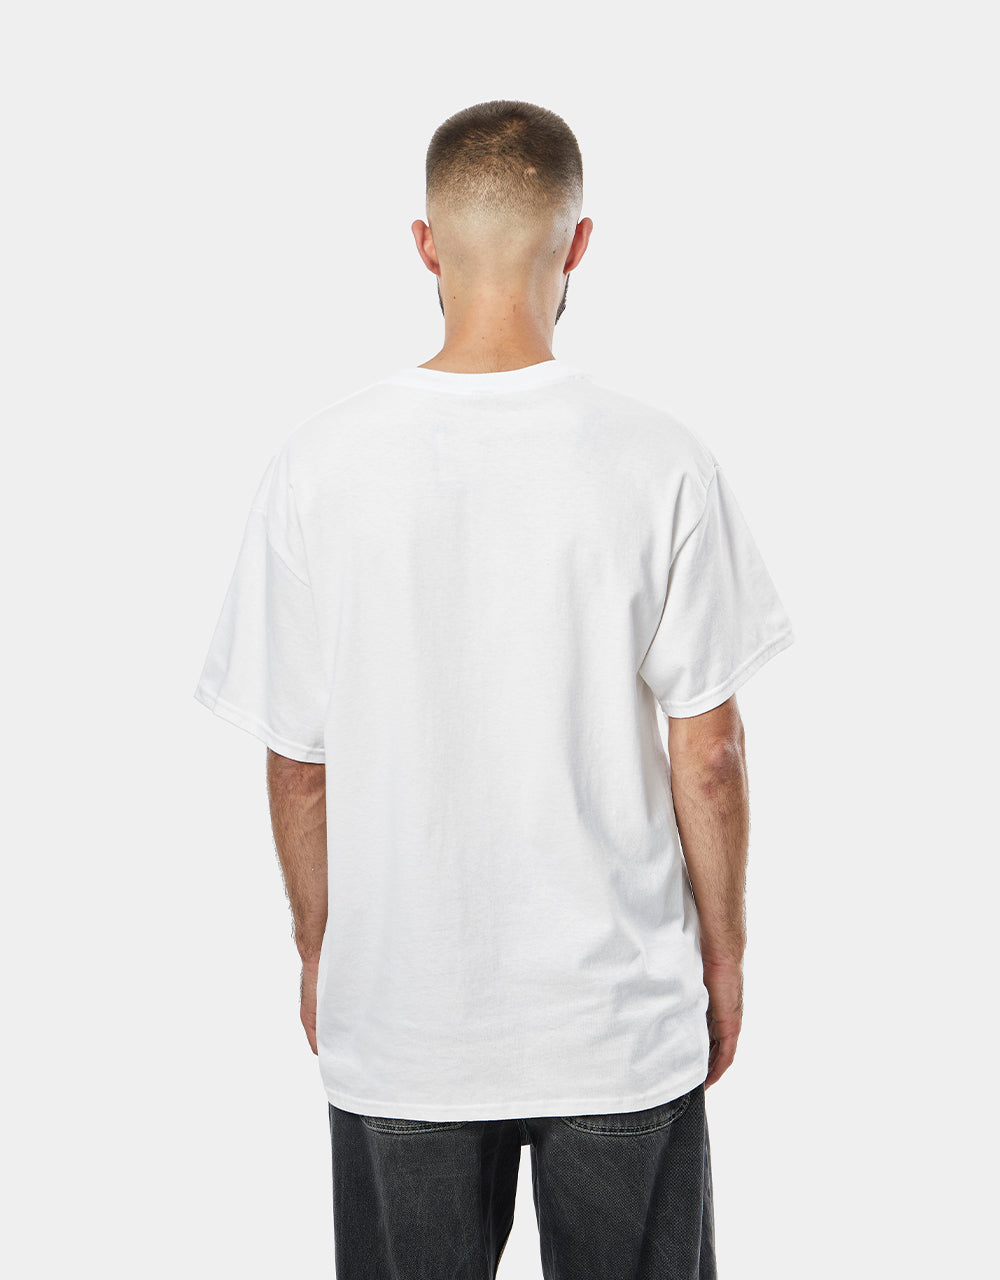 Route One Just What I Needed T-Shirt - White